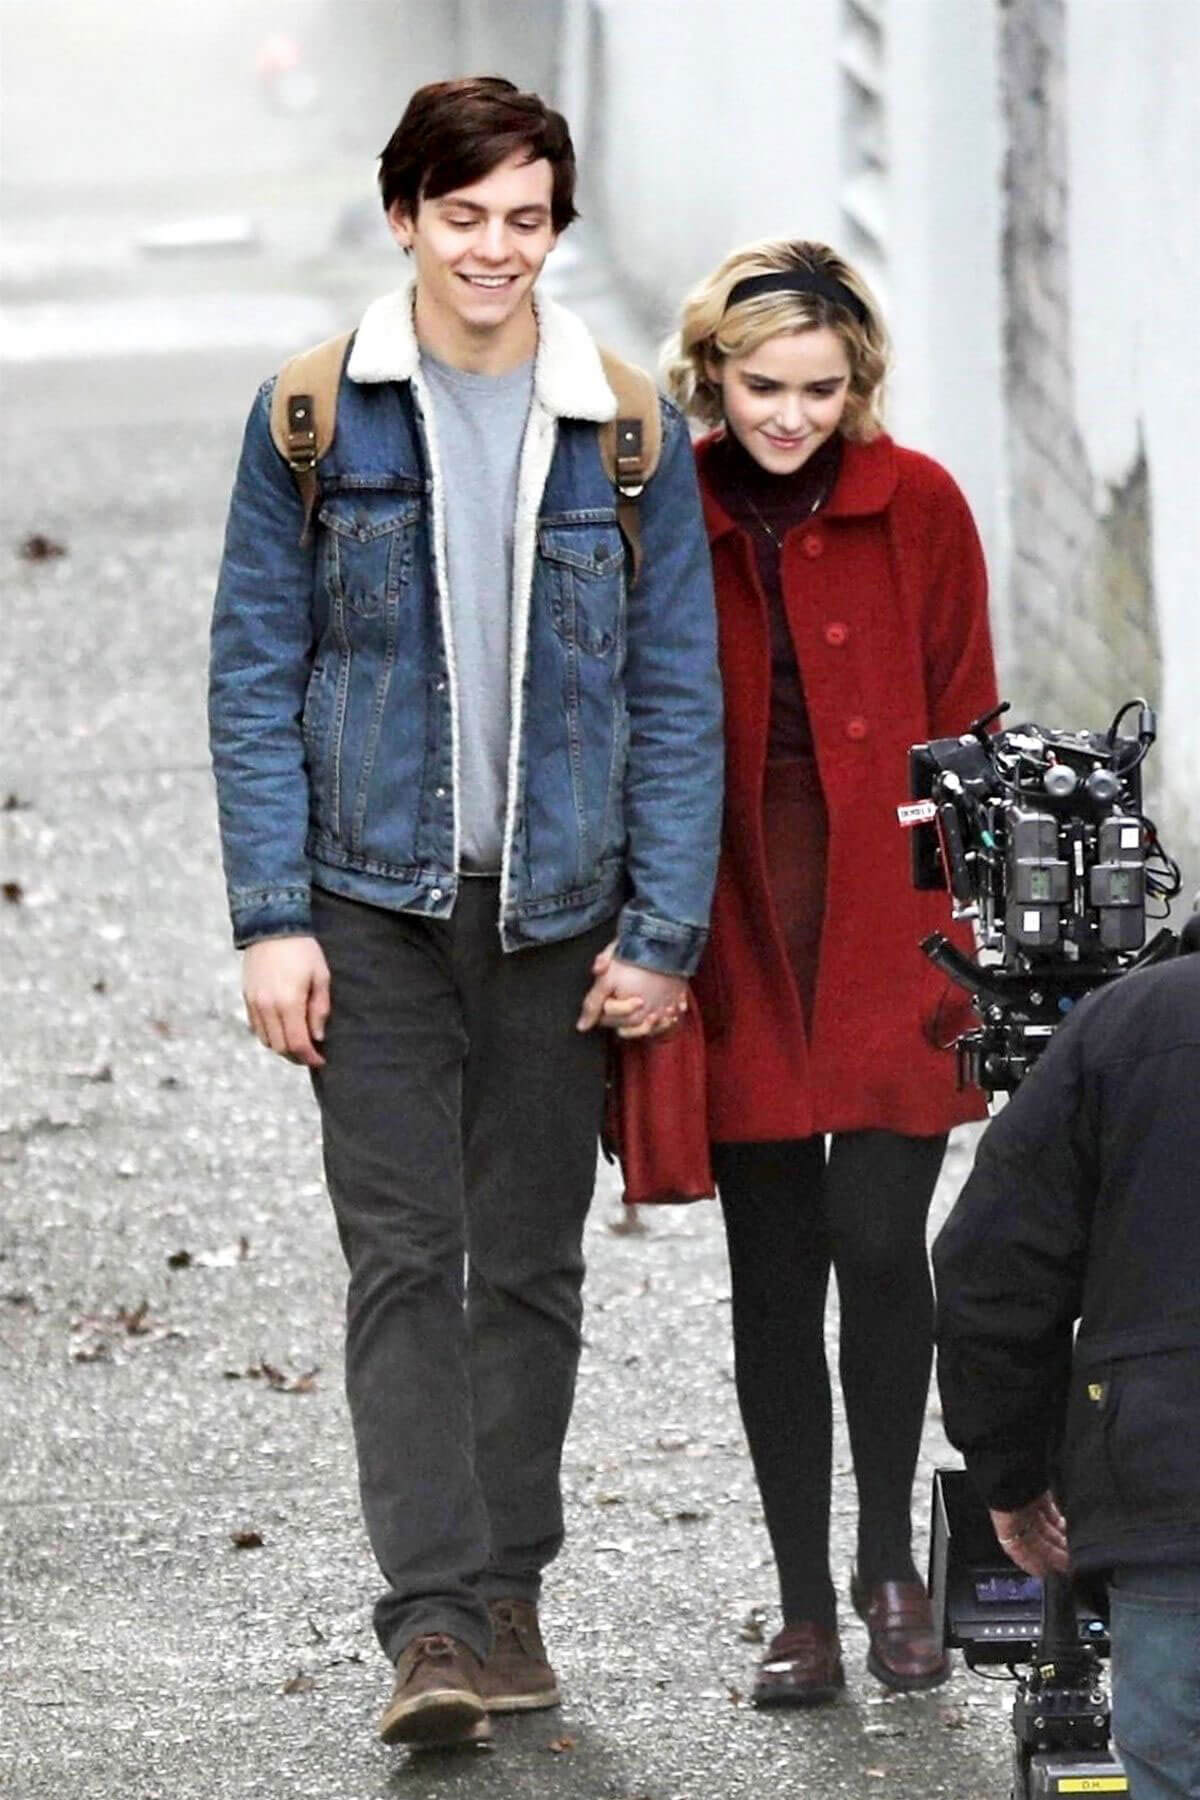 Kiernan Shipka Stills on the Set of The Chilling Adventures of Sabrina in Vancouver 2018/04/04